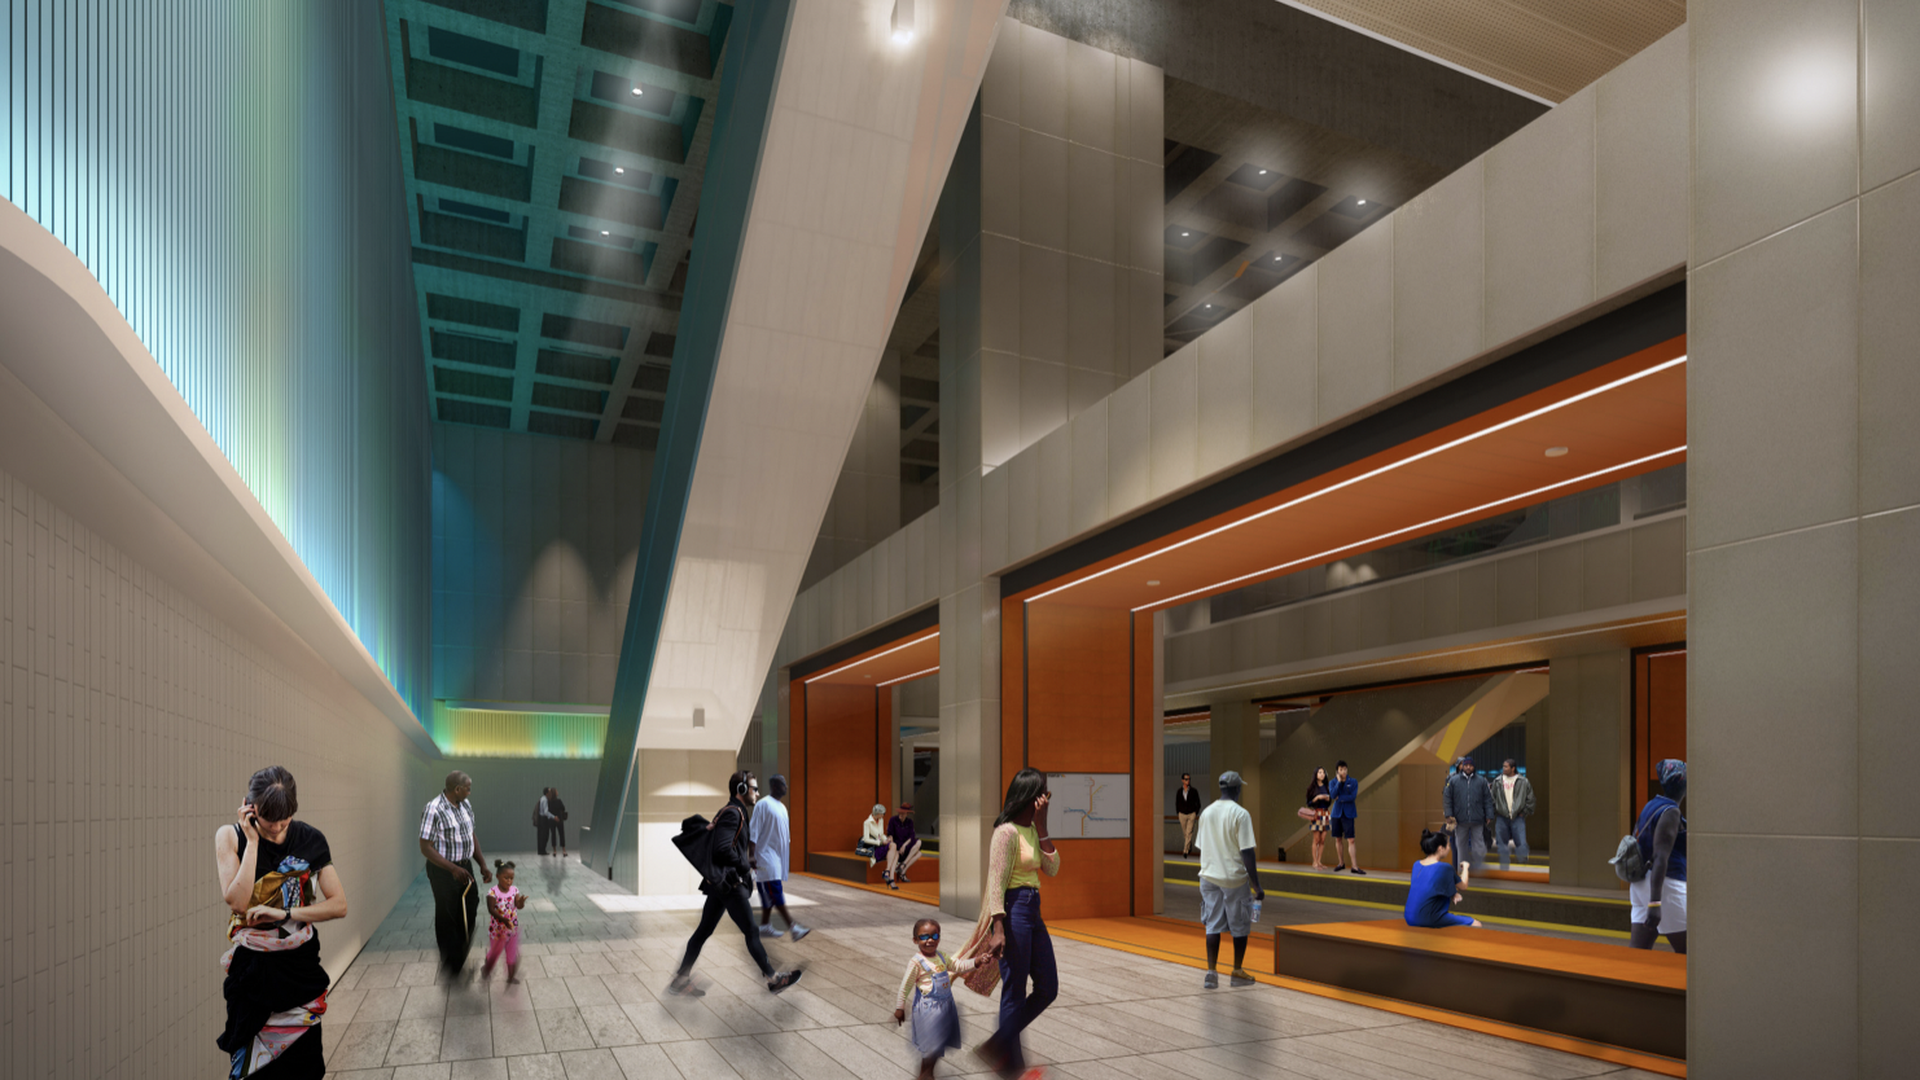 A rendering of a refurbished MARTA station with orange and blue light installations